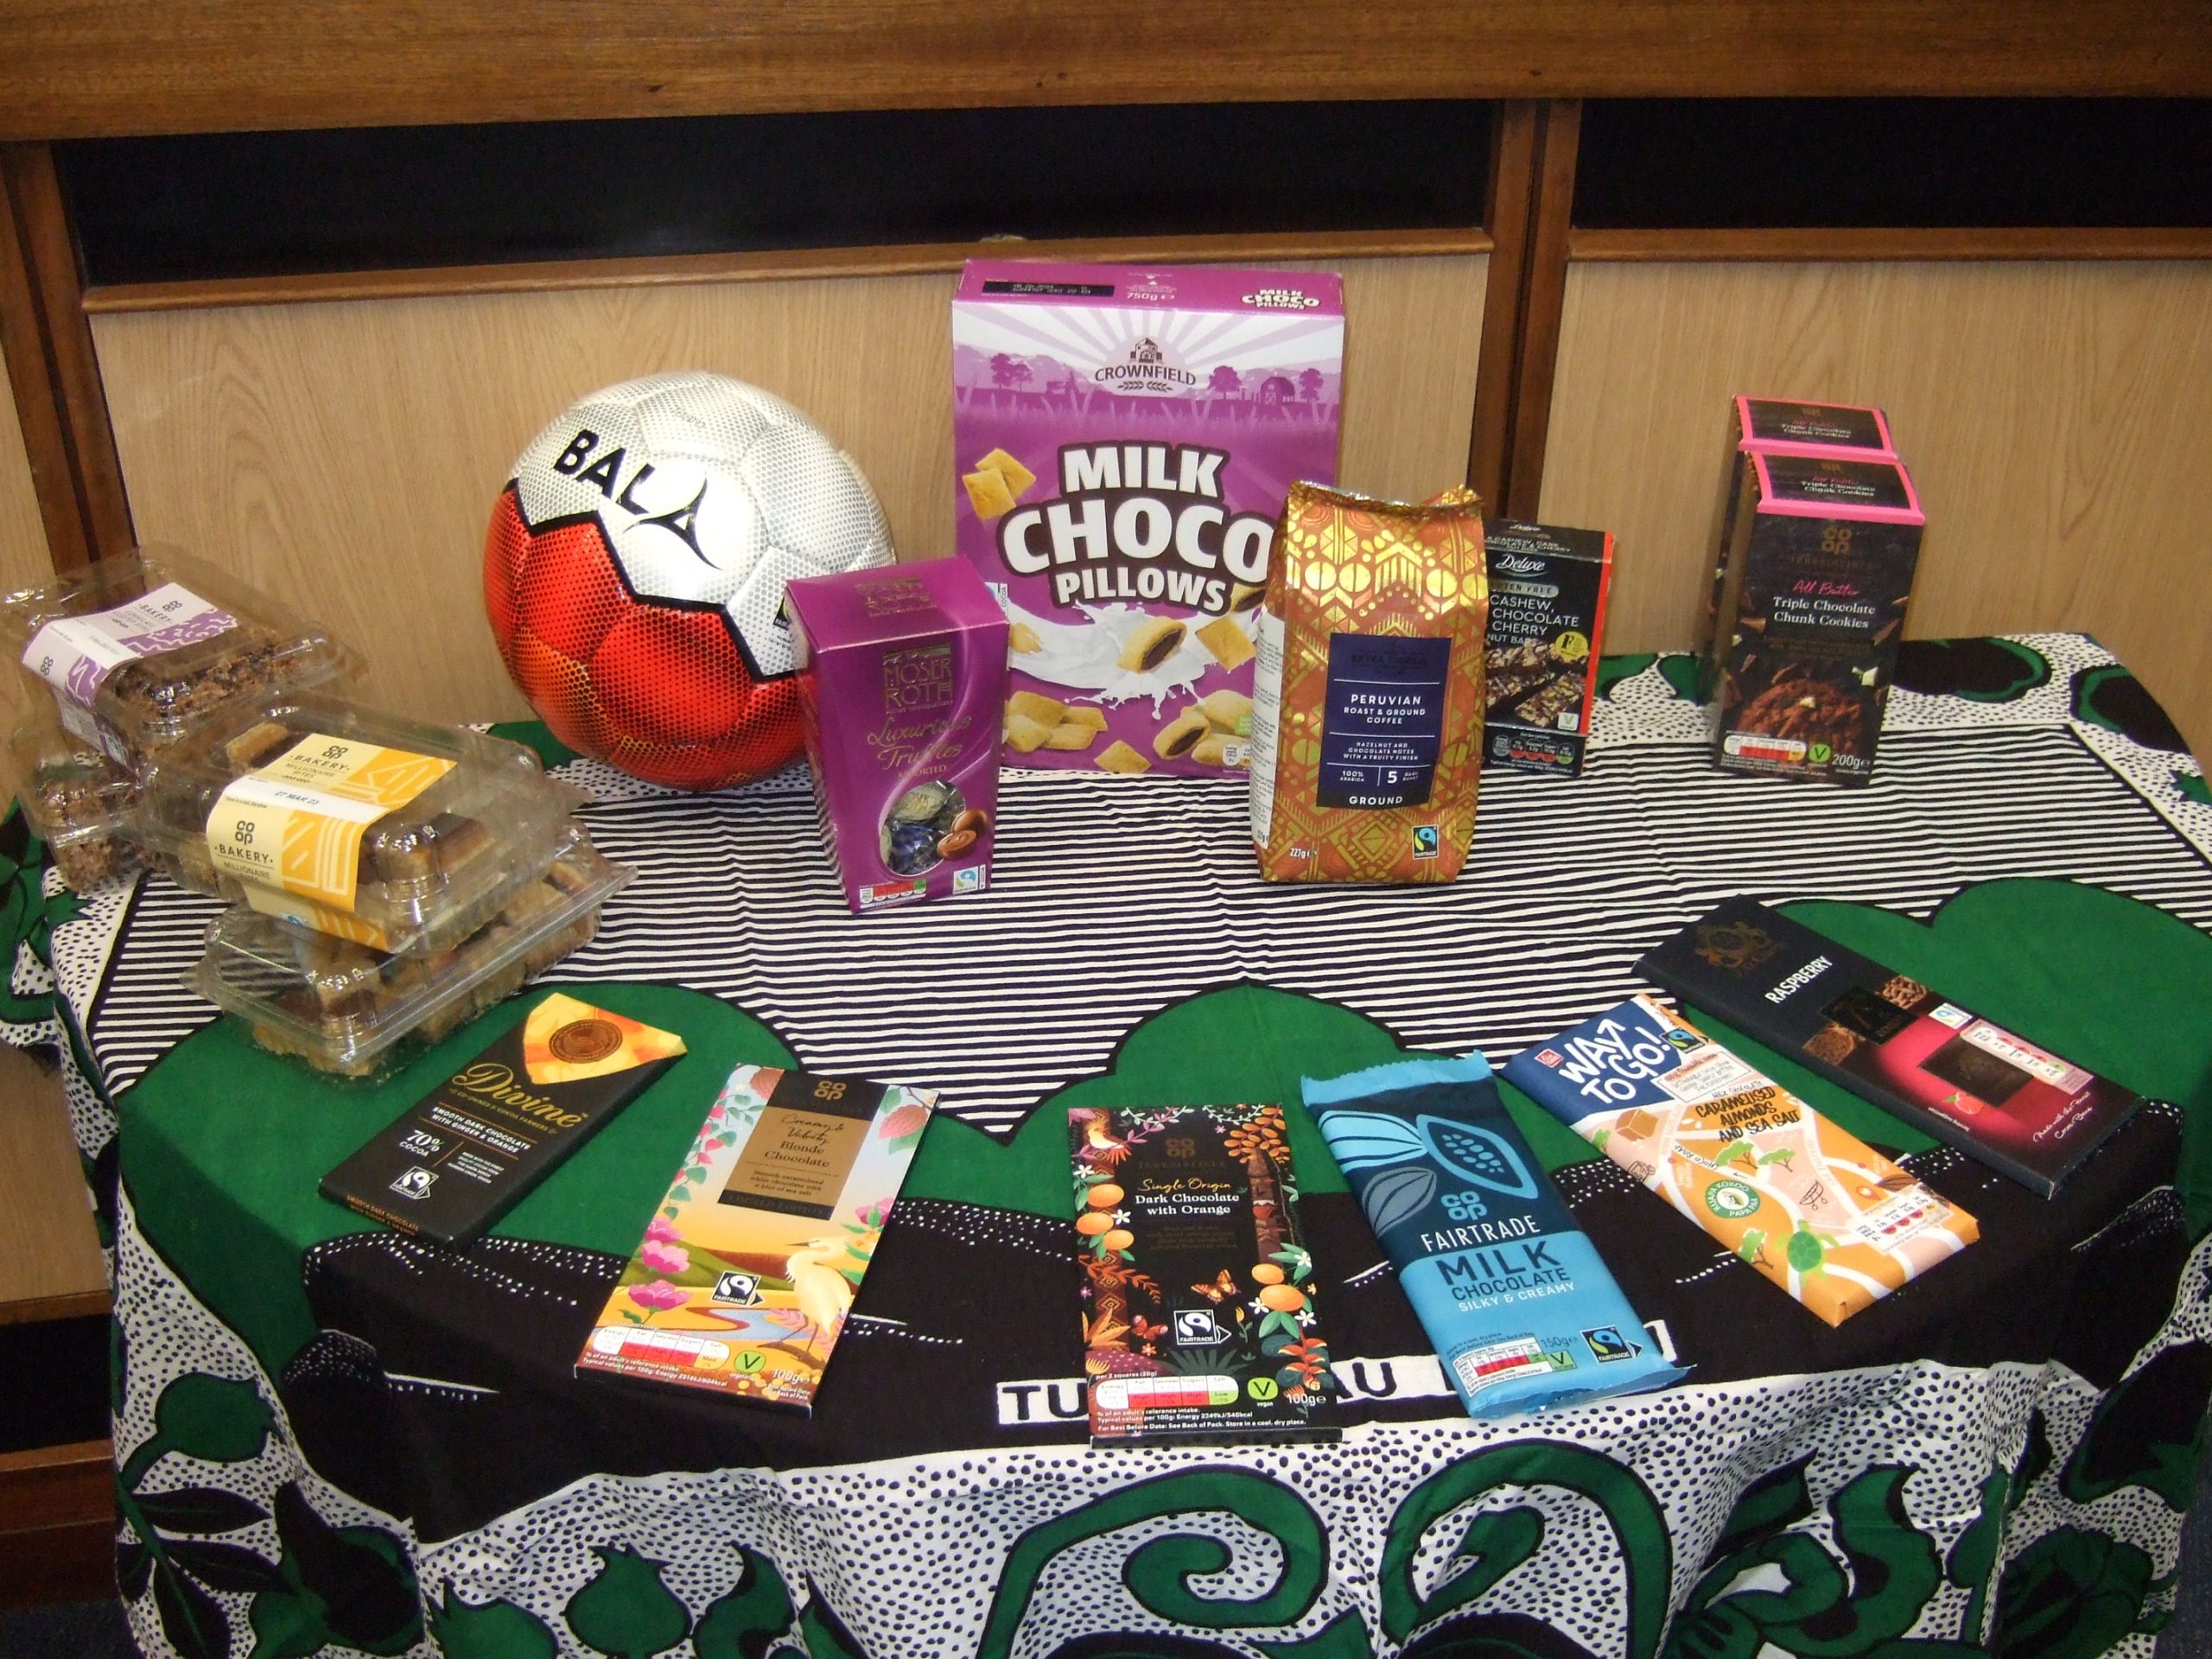  display of Fairtrade products on a semi-circular table